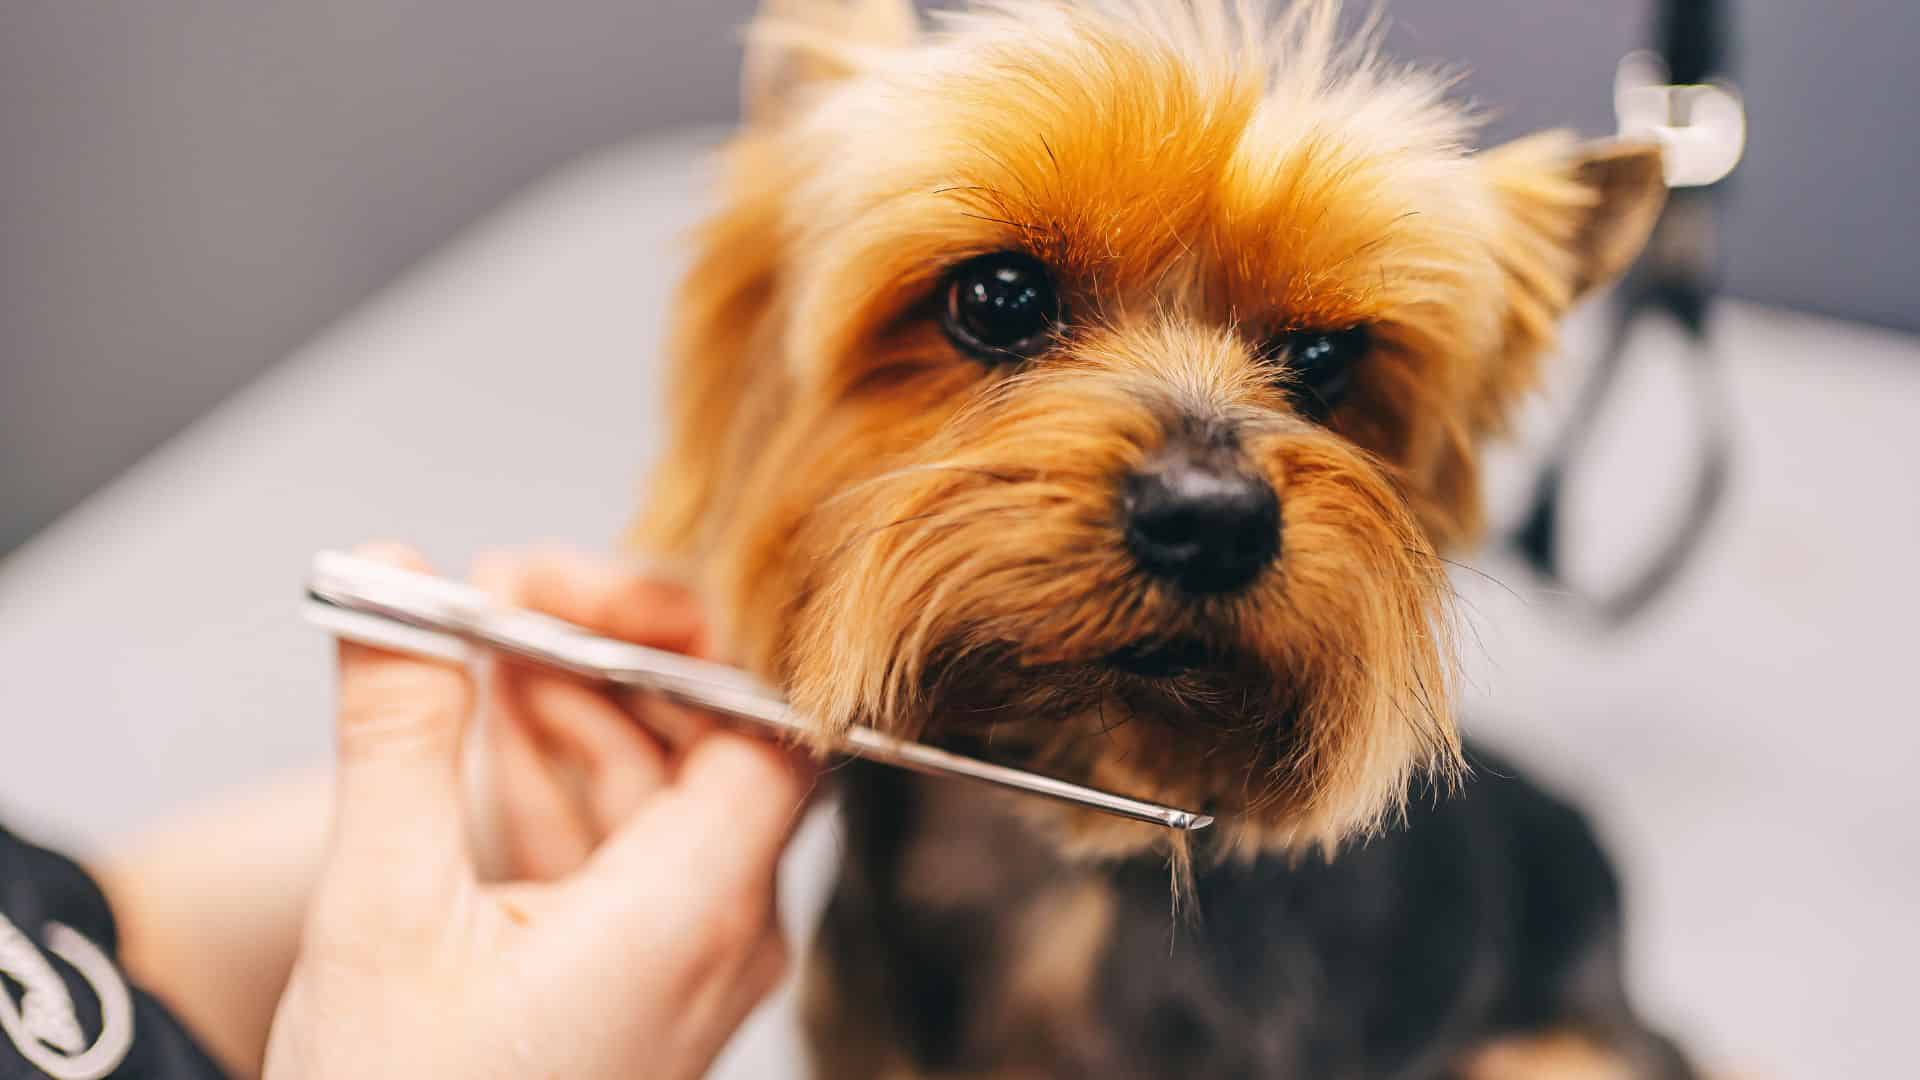 A dog being brushed with a grooming tool